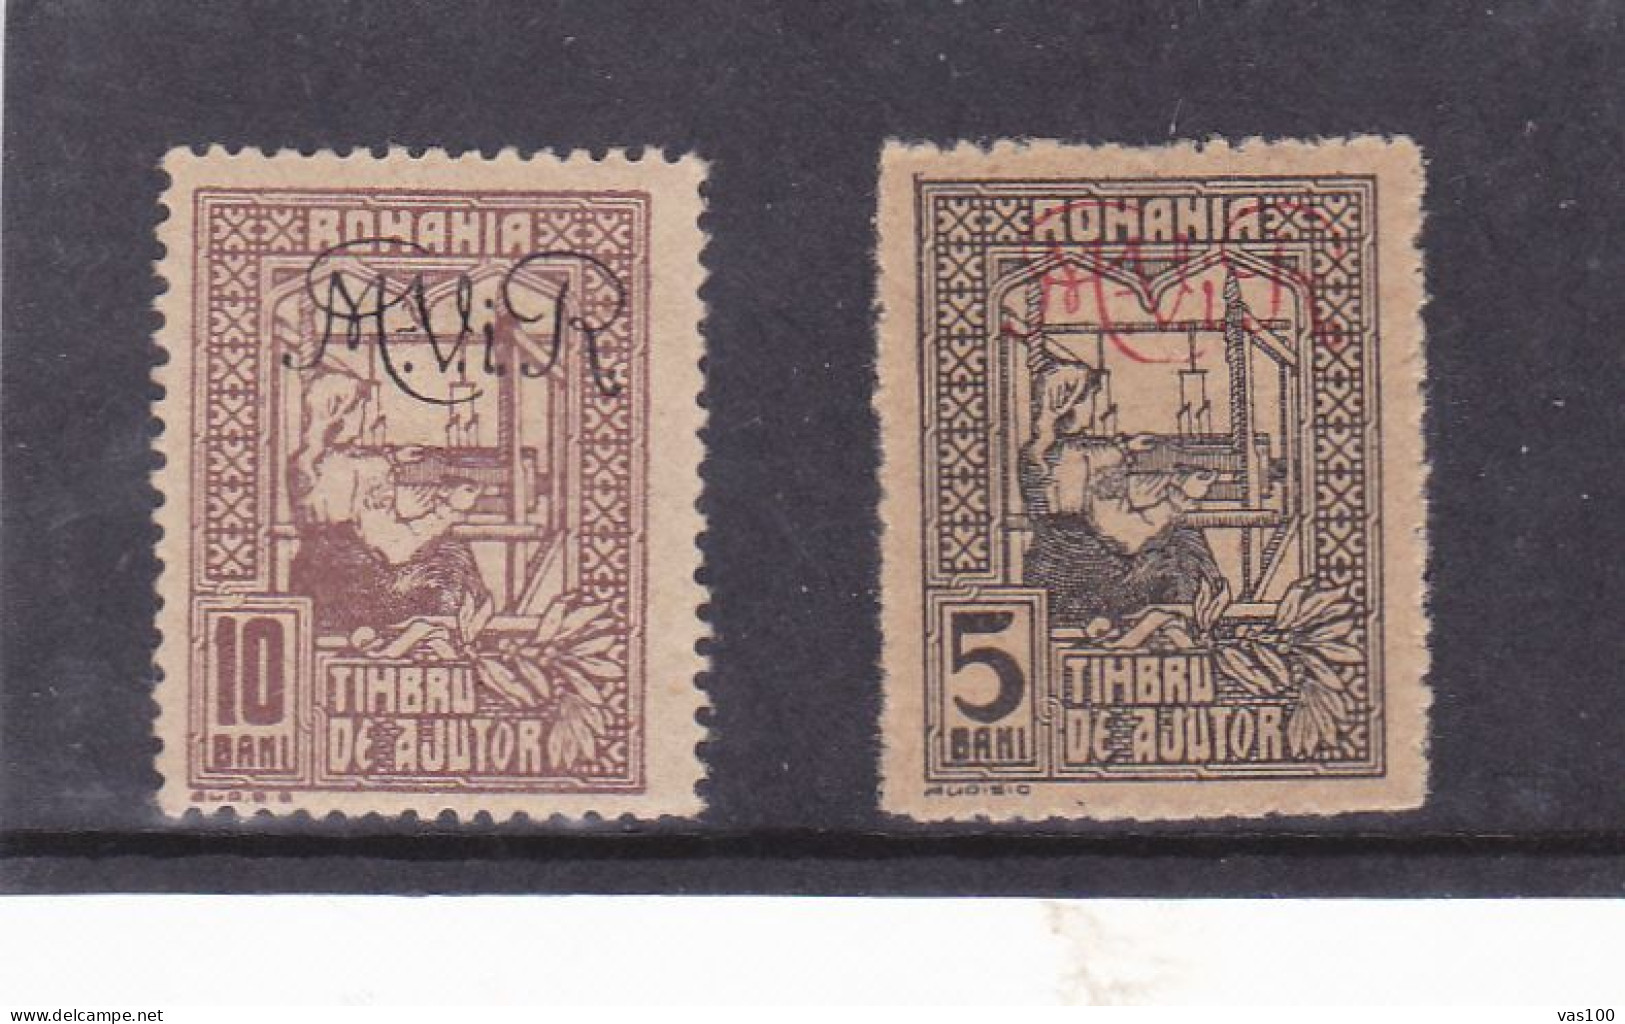 Germany WW1 Occupation In Romania 1917 MViR 5 +10 BANI 2 STAMPS POSTAGE DUE MINT - Ocupaciones